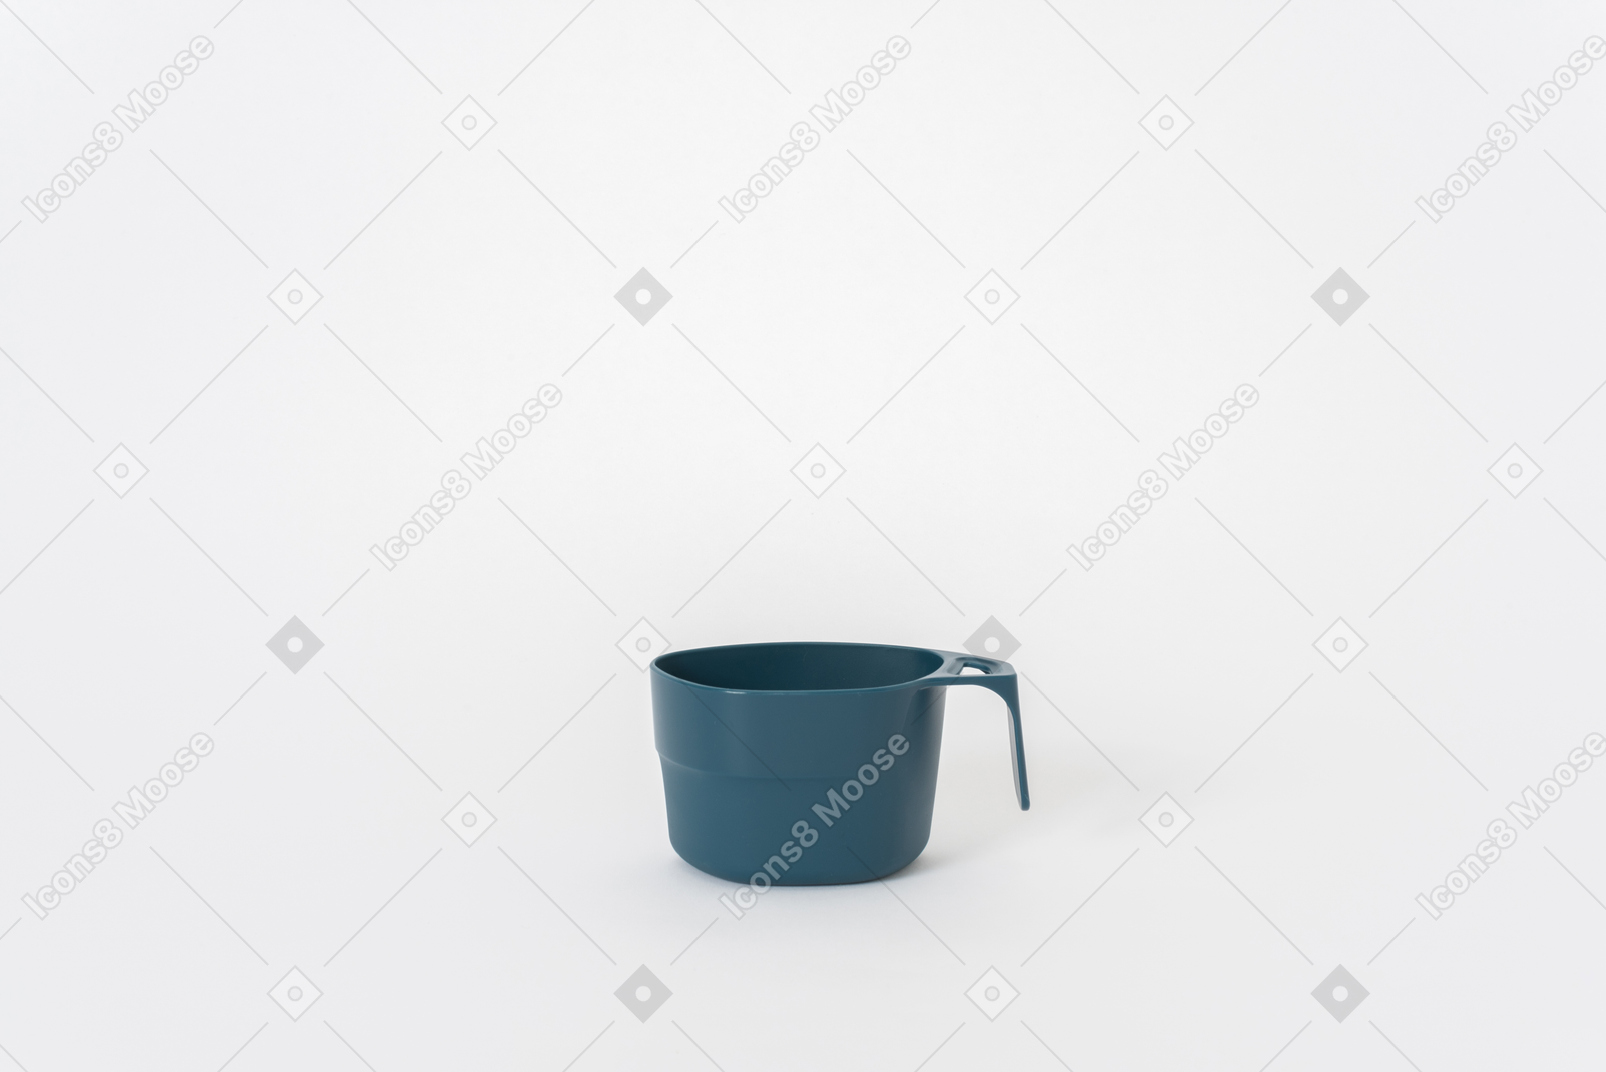 Plastic black cup on a white background